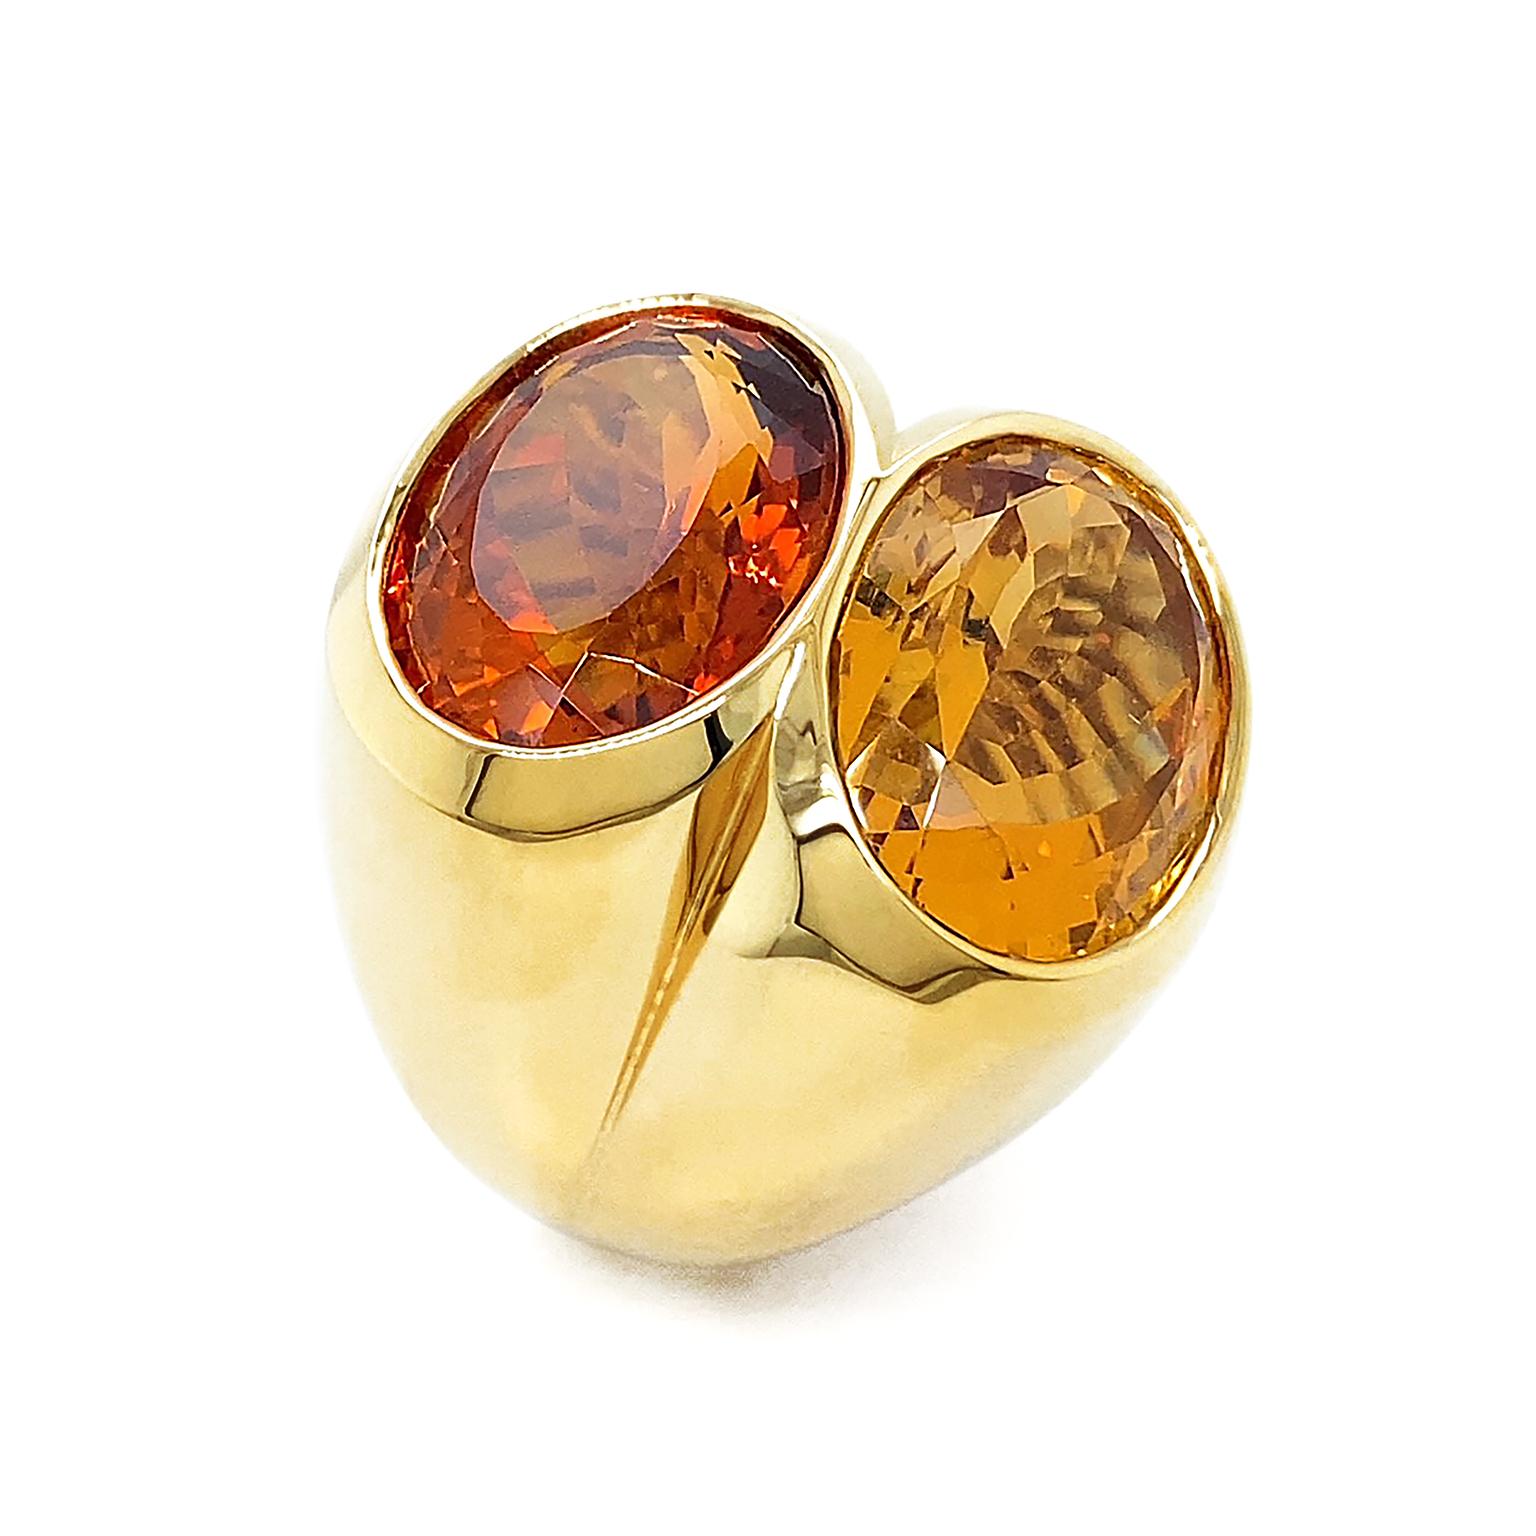 Two citrines unite together to showcase the array of the gemstone. One is a red-orange Madeira citrine, while the the other is yellow-orange. The two oval citrines are bezel set in an 18k yellow gold double shank for a blazing appraisal. The